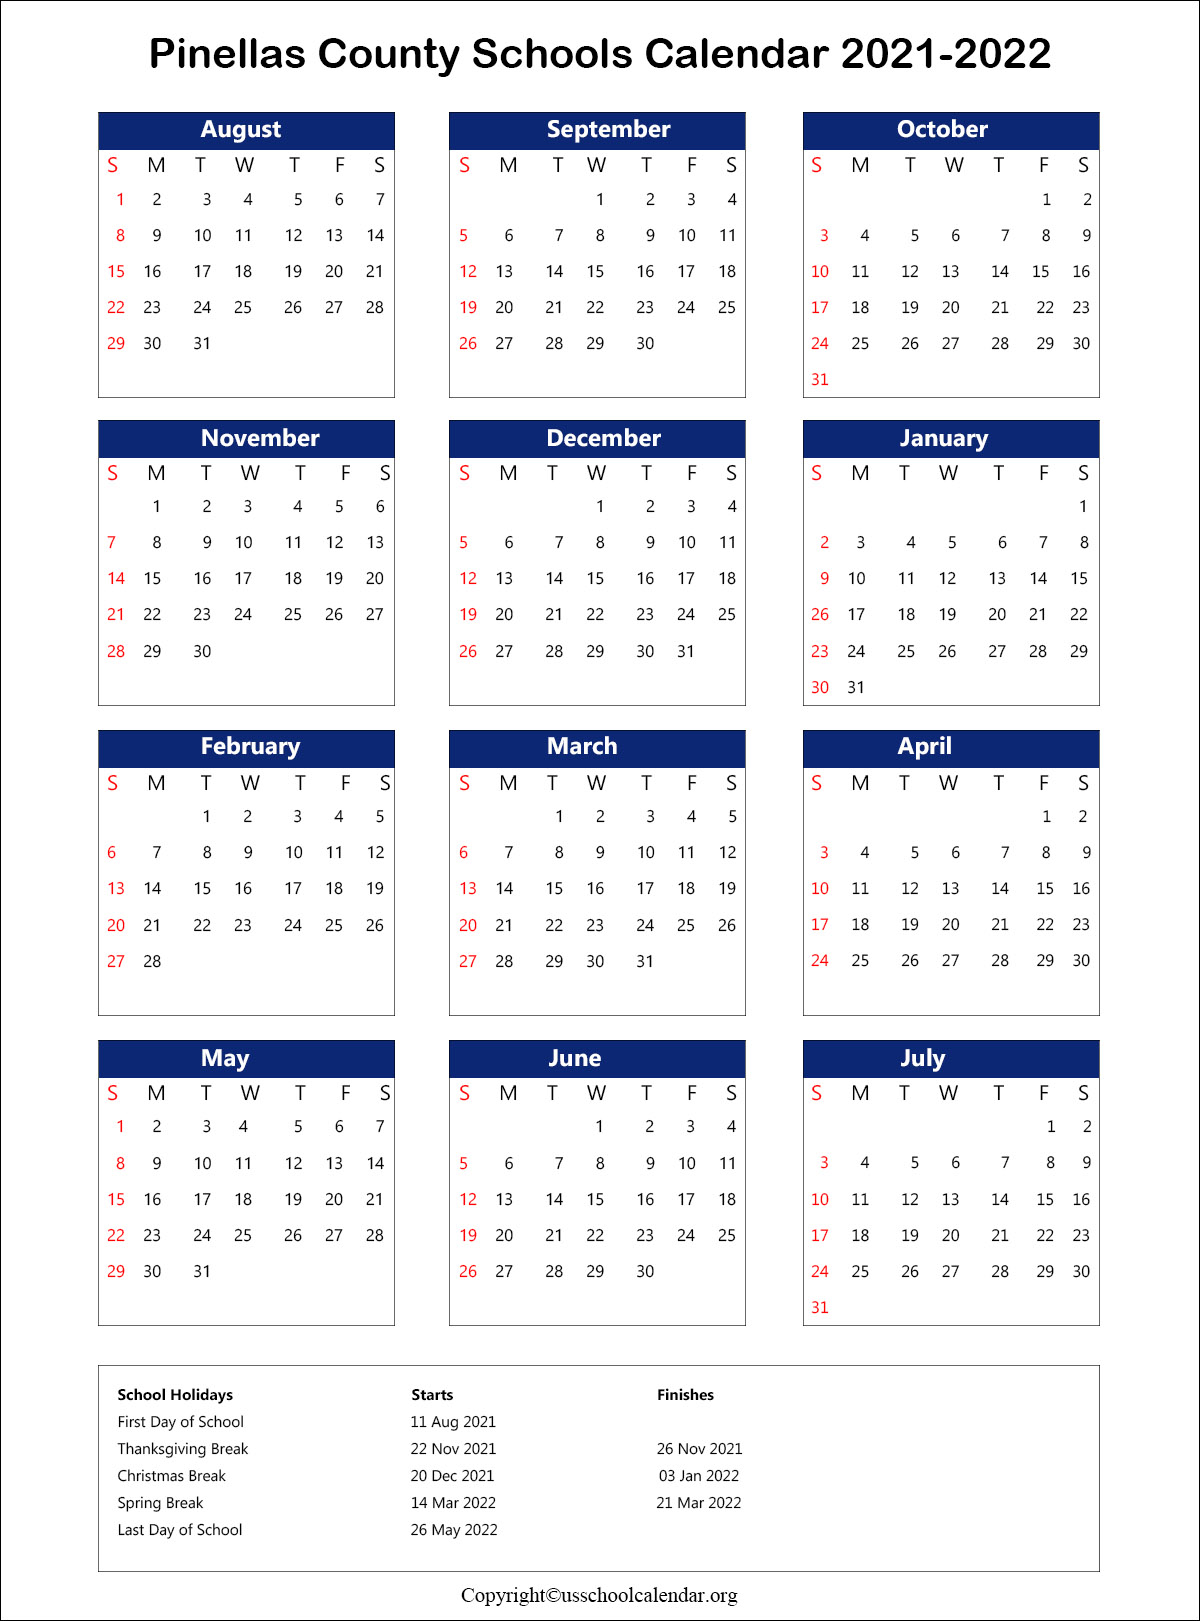 pinellas-county-school-calendar-with-holidays-2021-2022